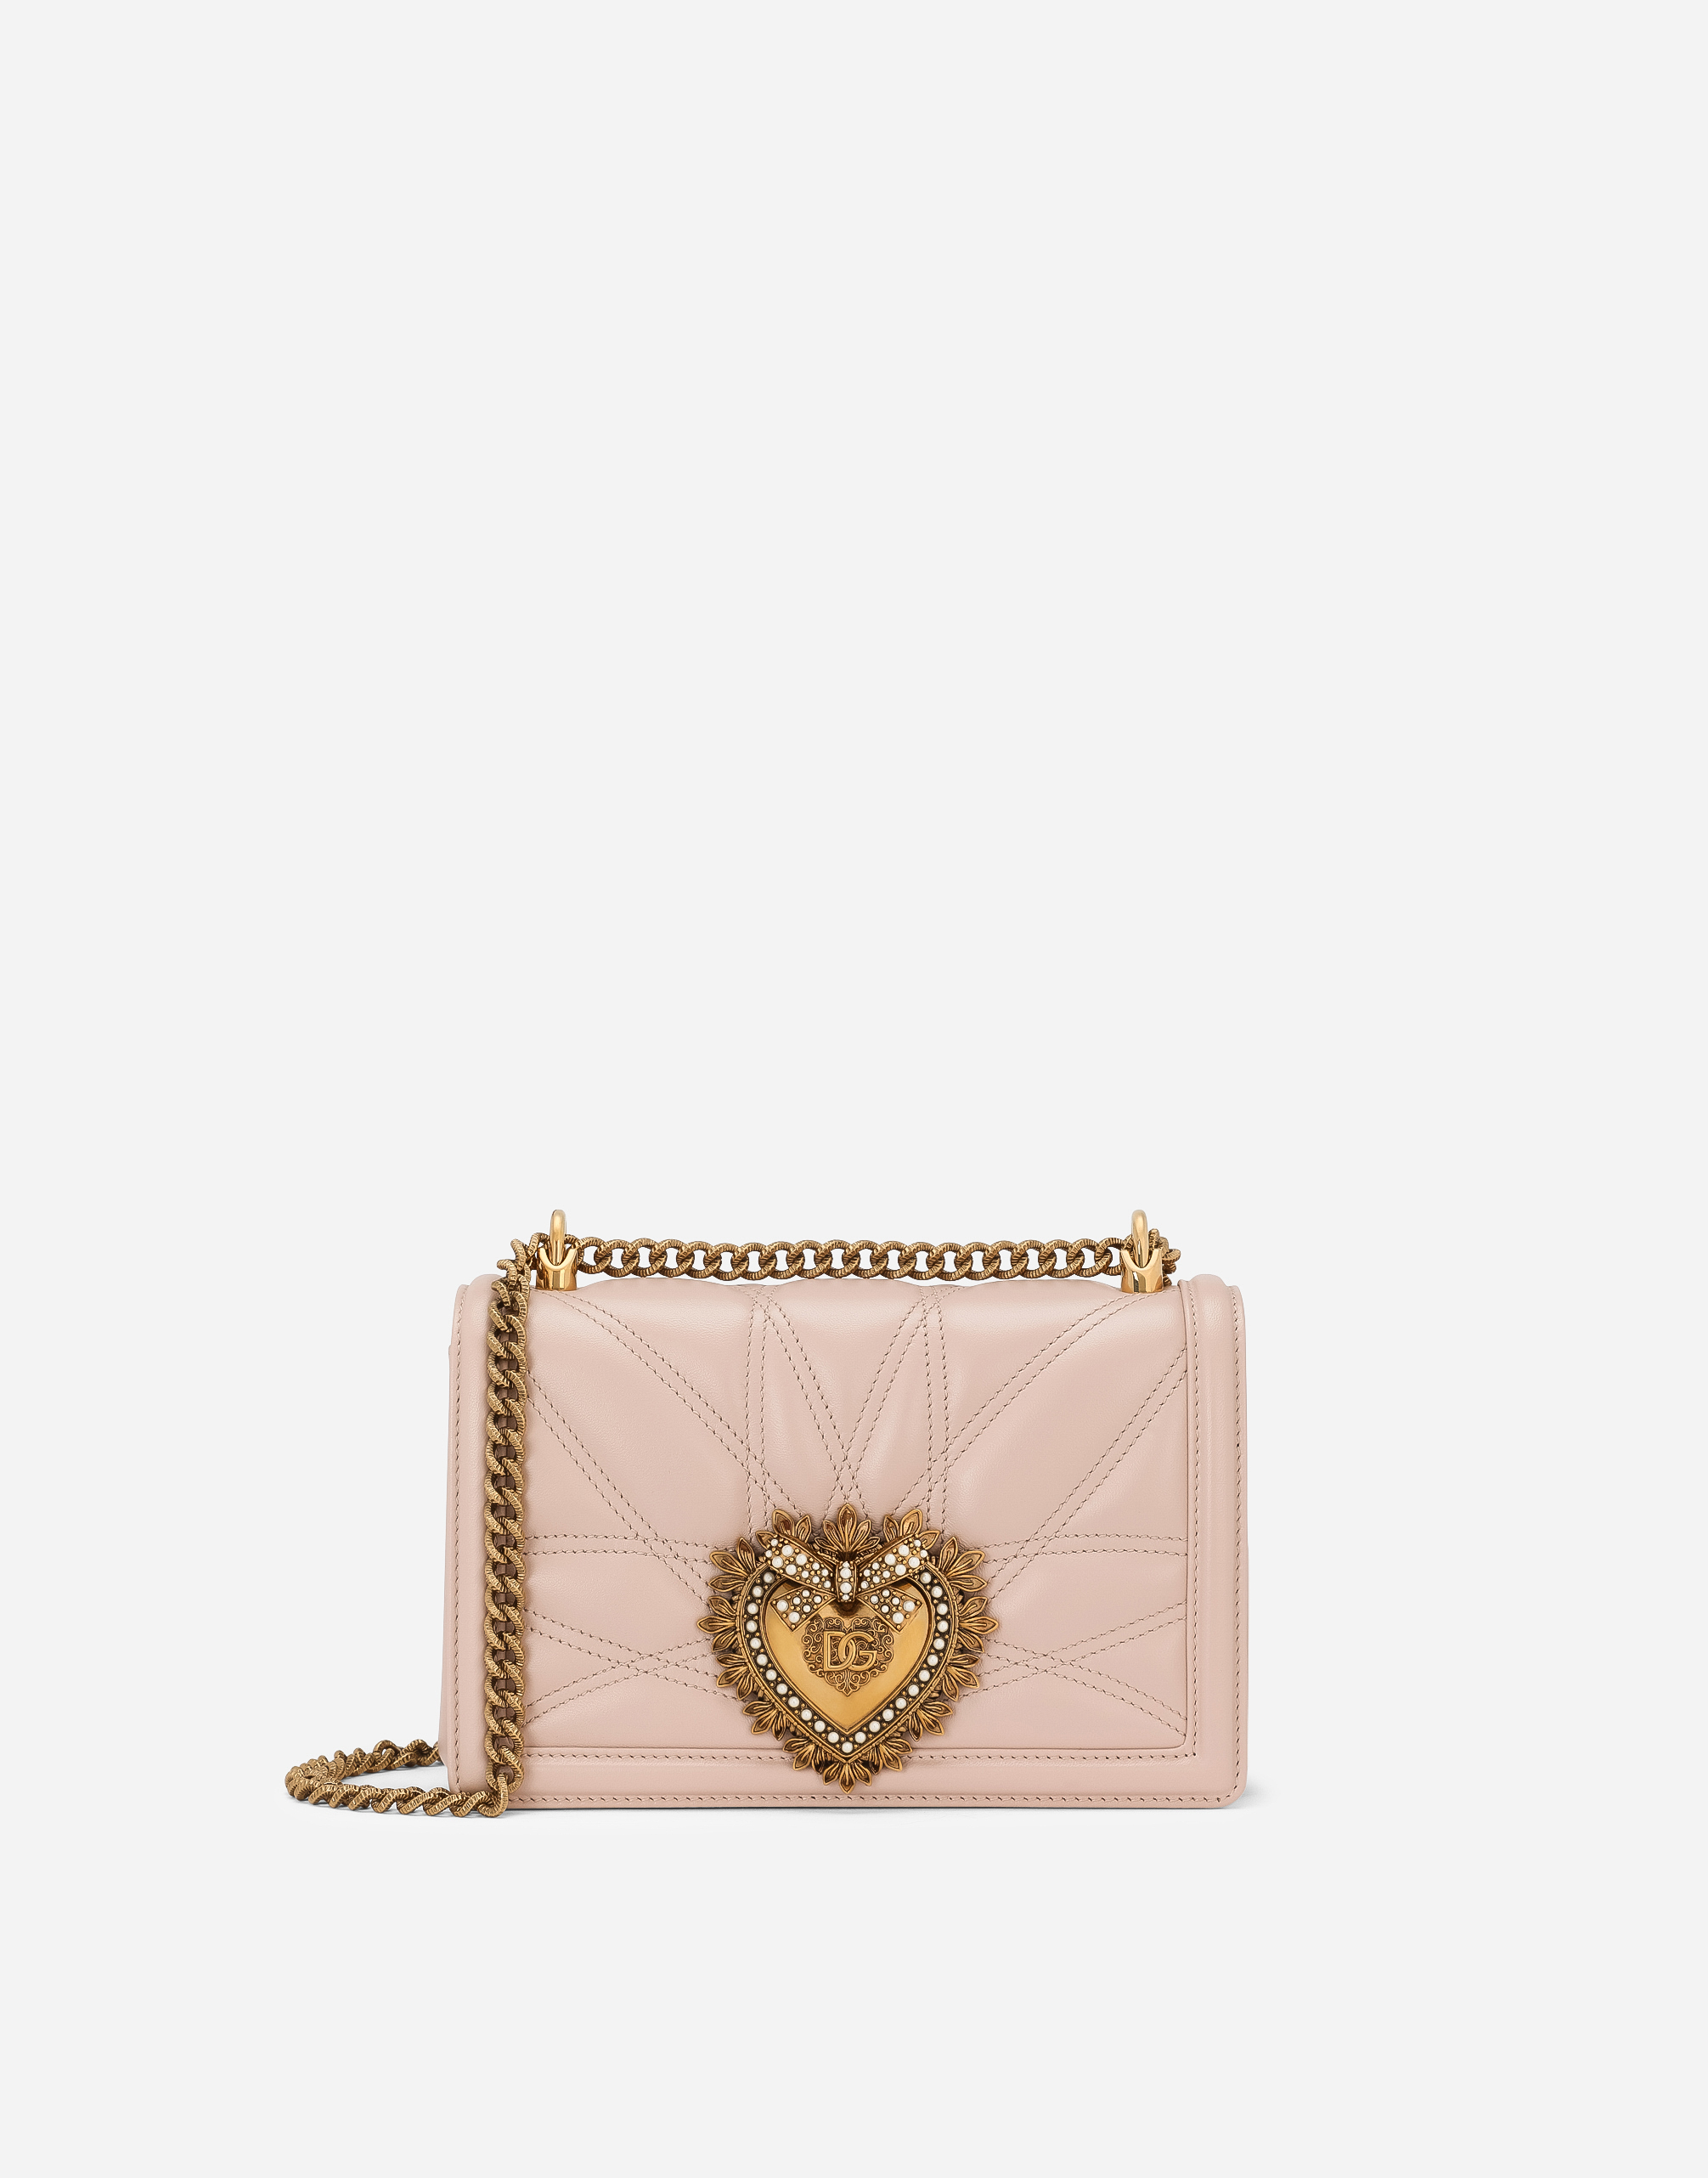 Medium Devotion bag in quilted nappa leather in Pale Pink for 